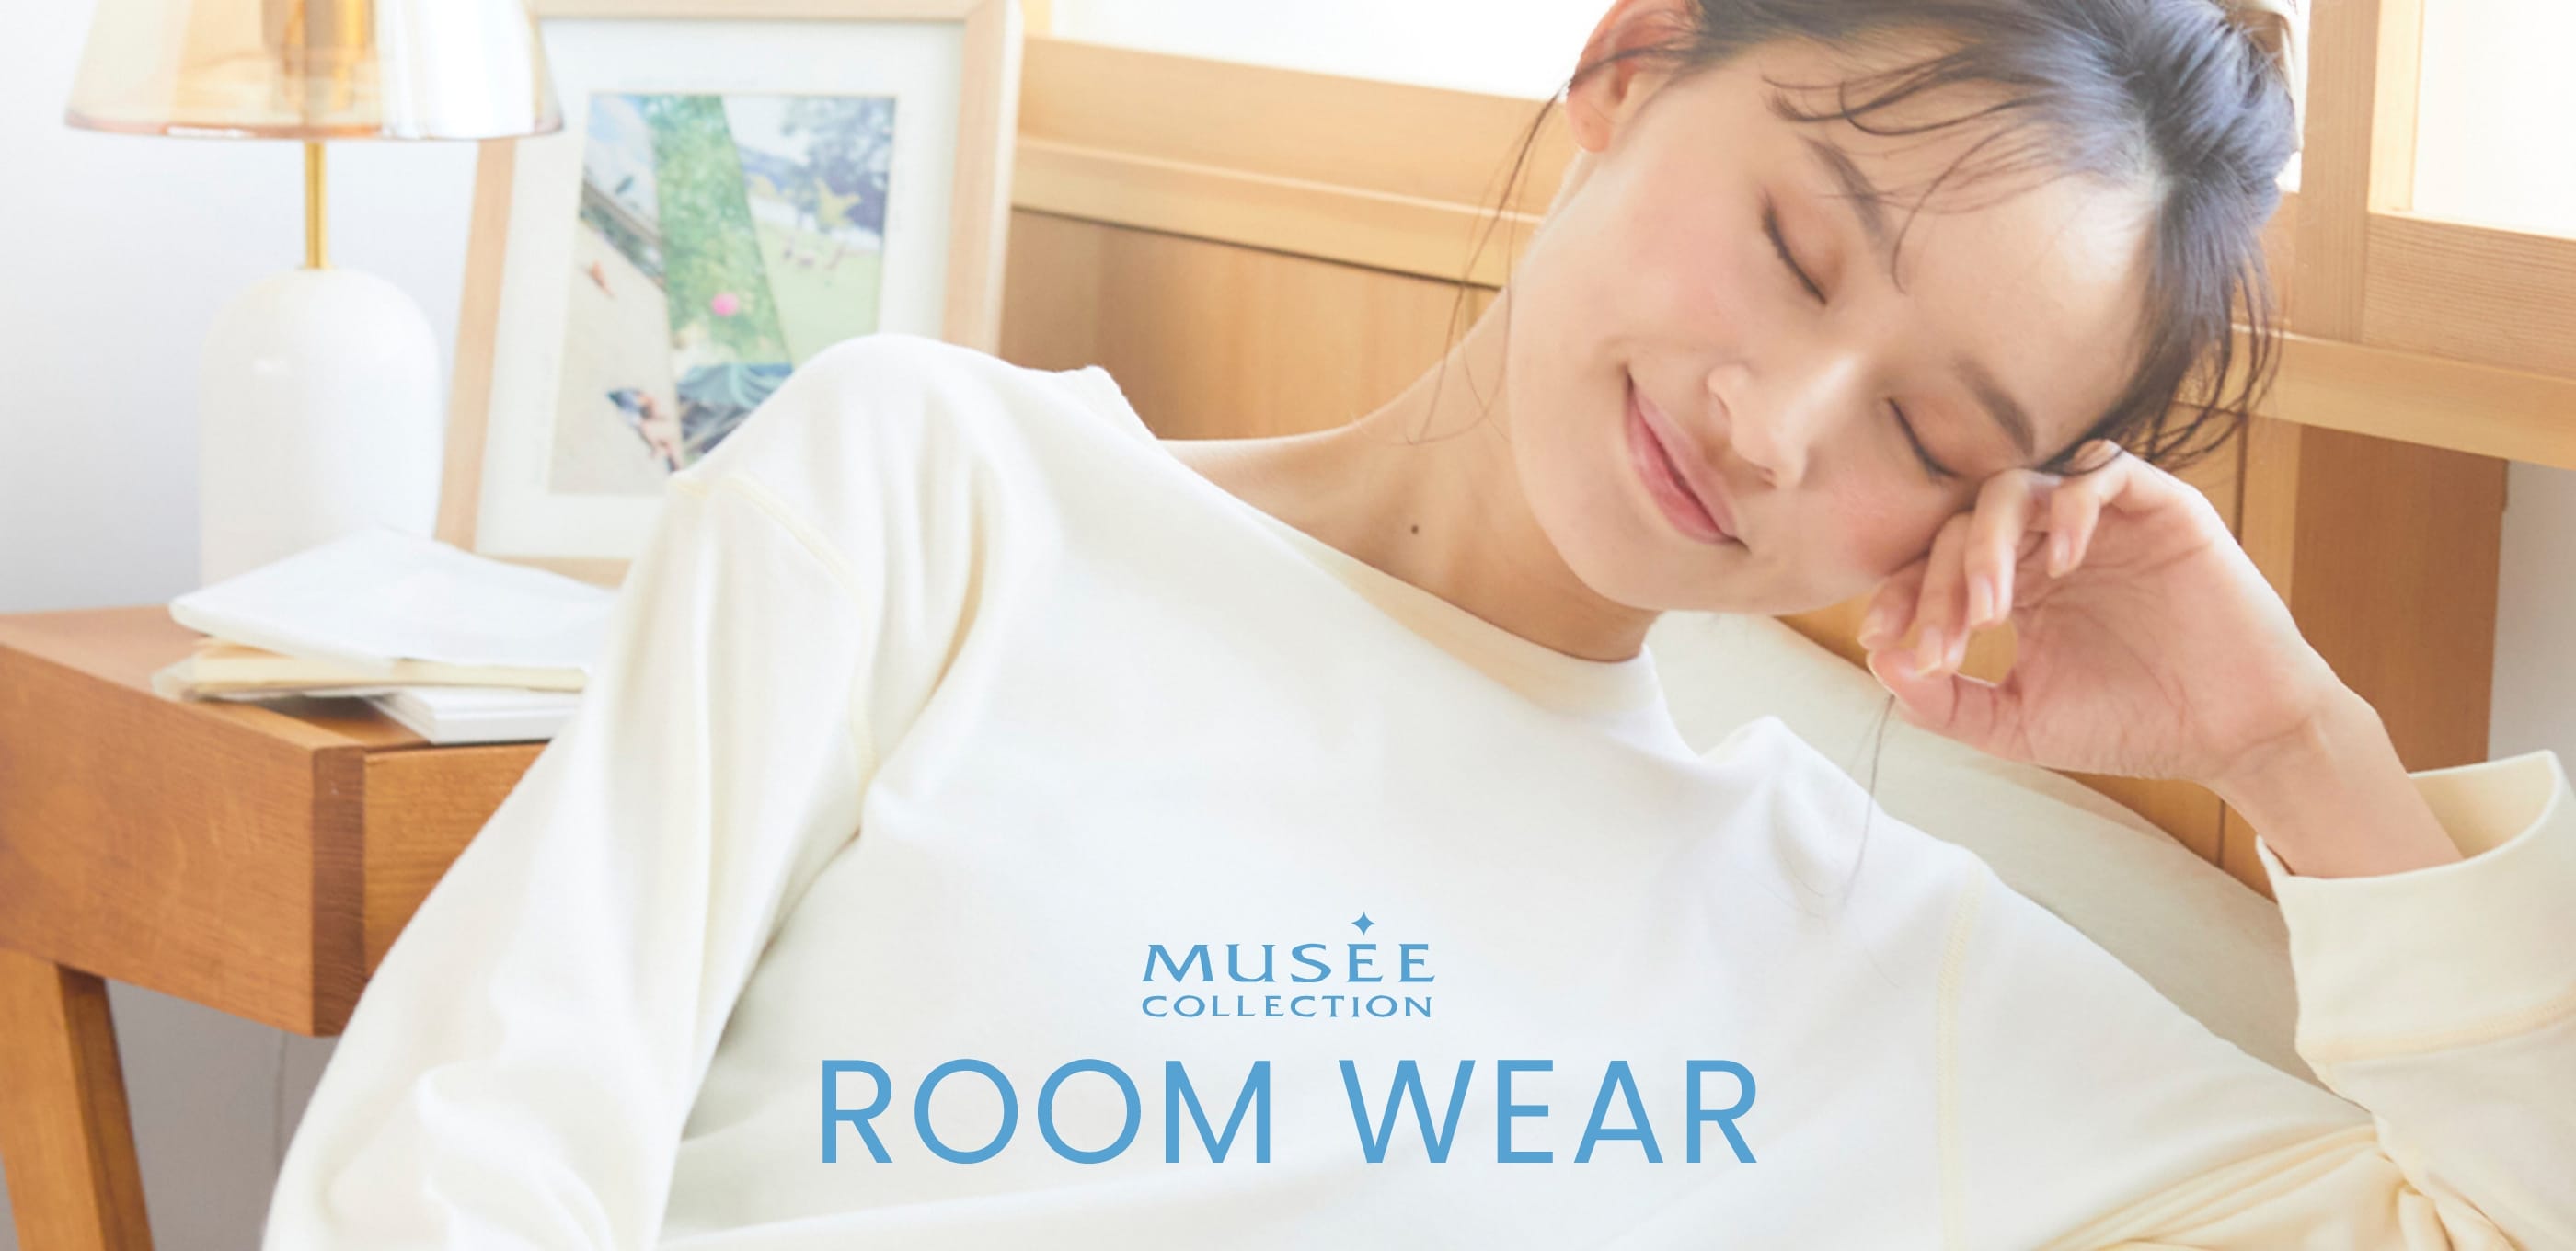 2023 MUSEE COLLECTION ROOM WEAR